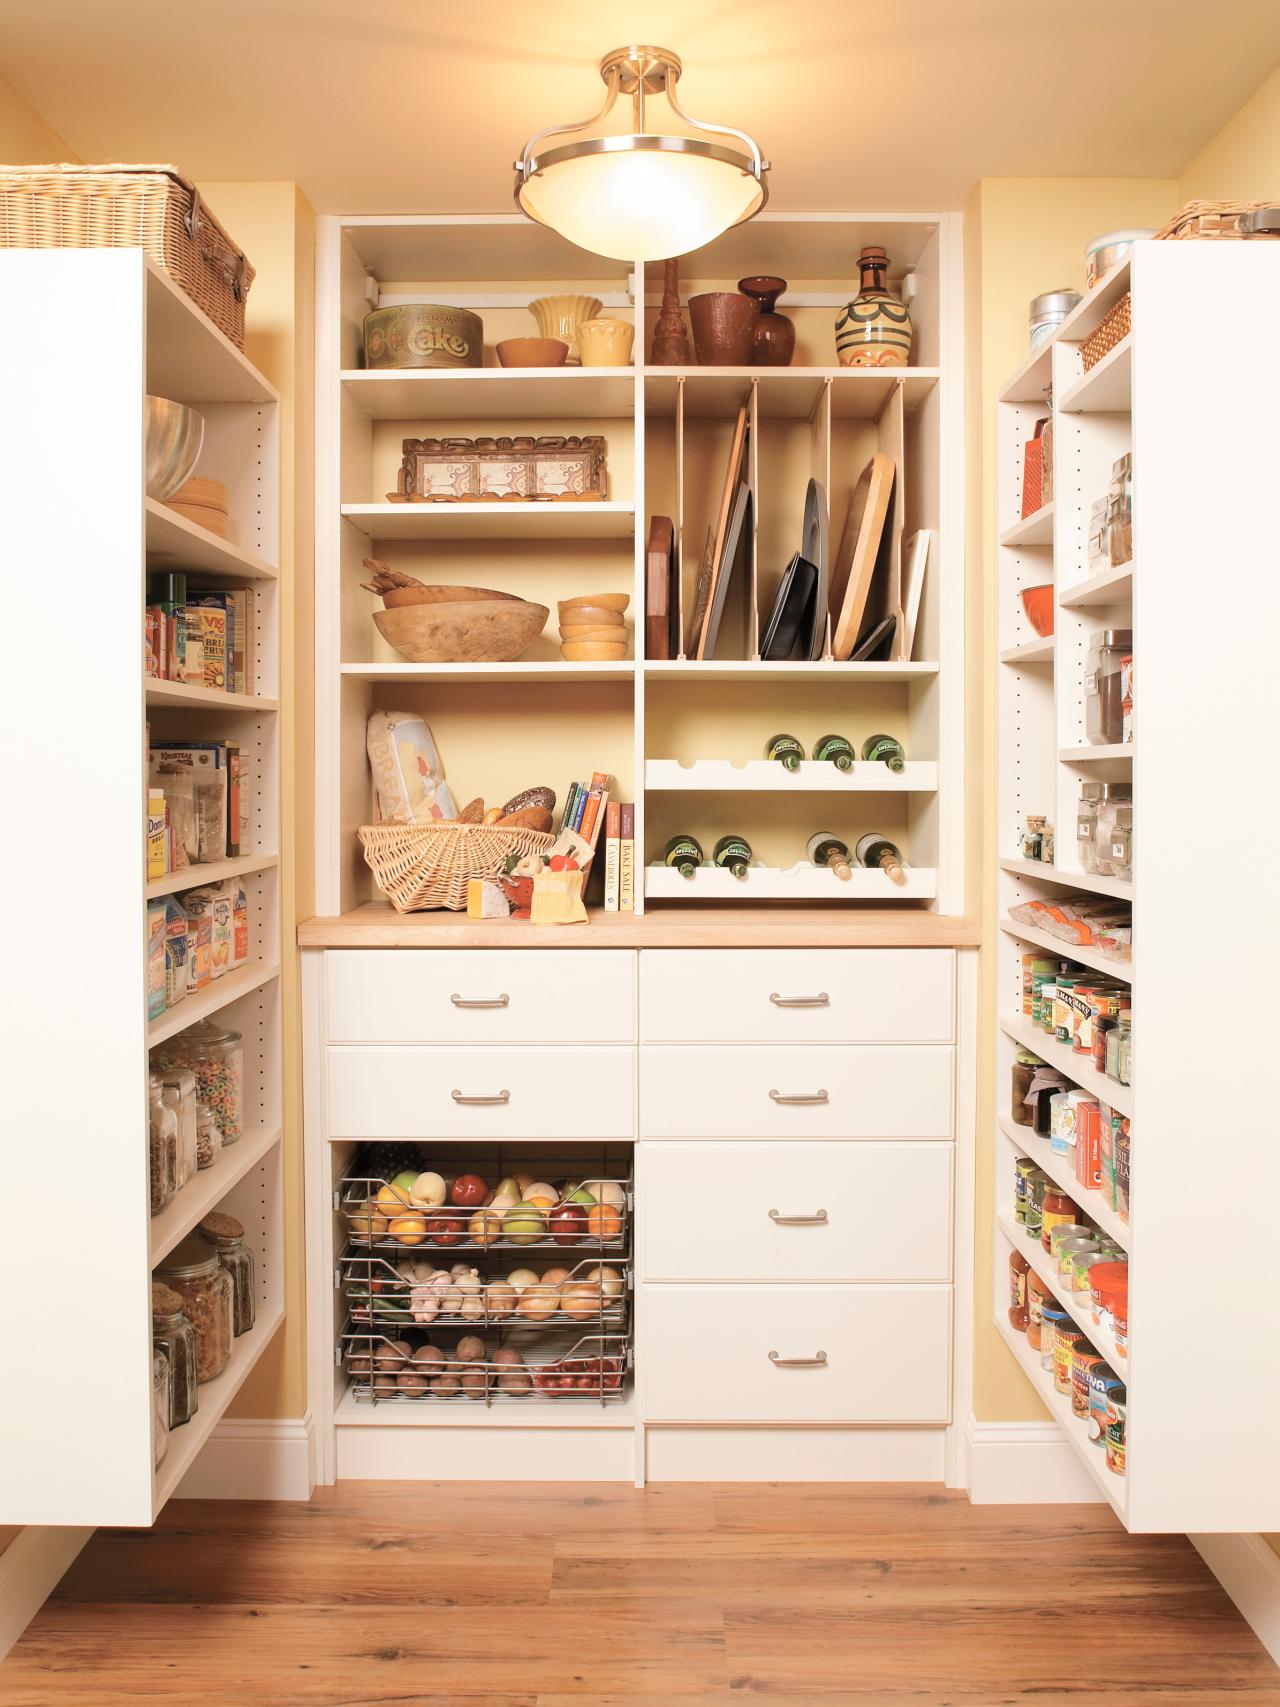 51 Pictures Of Kitchen Pantry Designs Ideas - vrogue.co